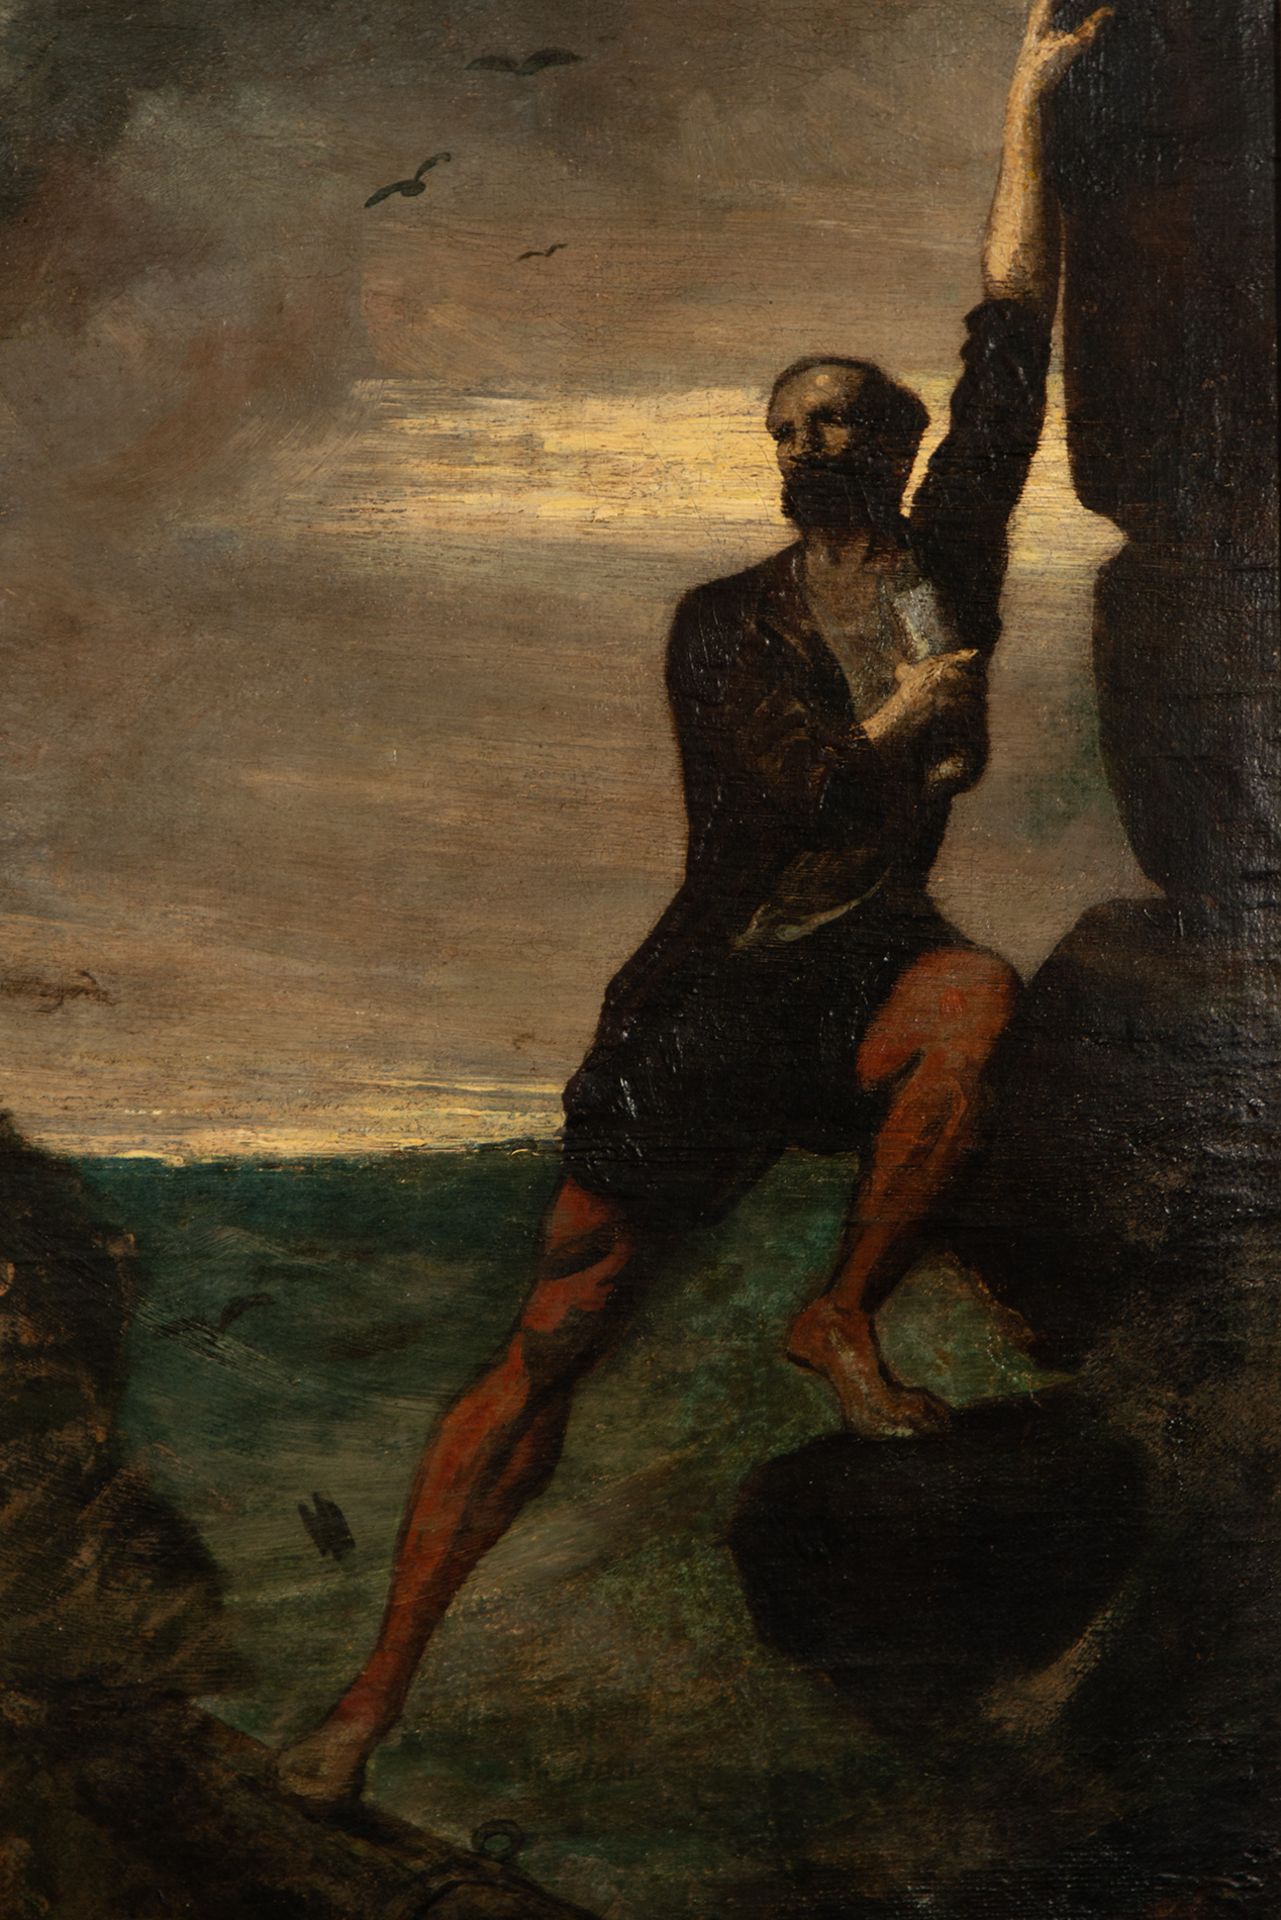 Castaway on a cliff, Portuguese school of the 19th century - Image 2 of 3